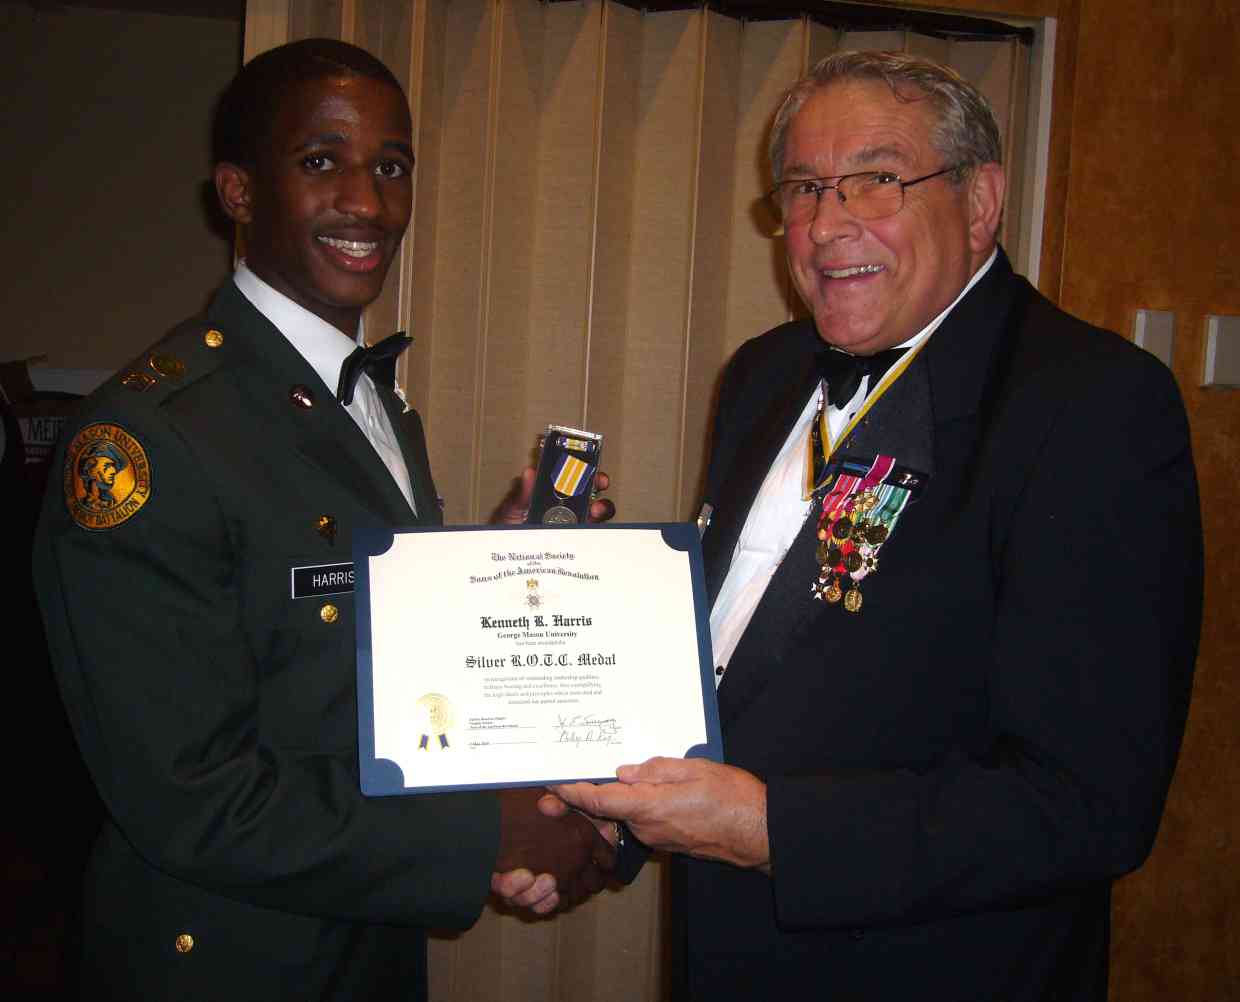 Fairfax Resolves SAR Chapter President John E. Sweeney, Colonel, USA-Ret. presents the Silver ROTC medal to Cadet Kenneth R. Harris, III